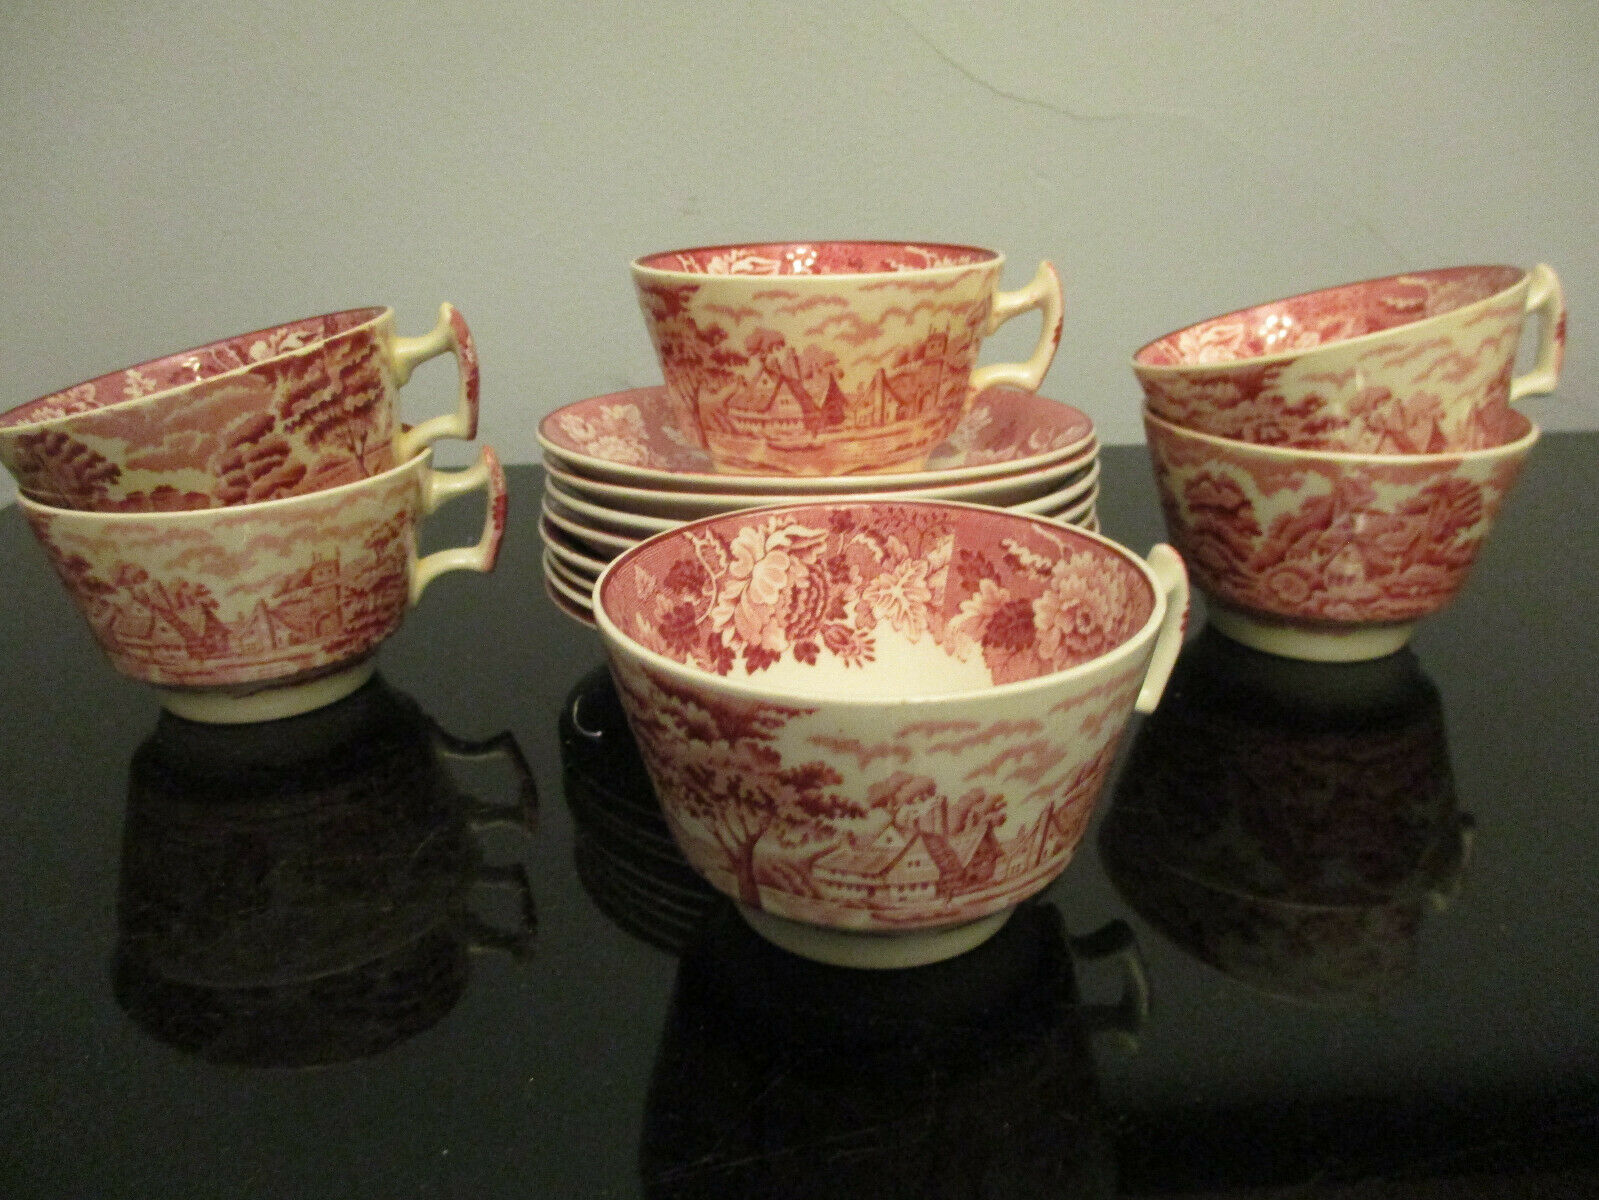 6 Enoch Woods Ware English Scenery Red Pink Transfer Ware Cups Saucers!